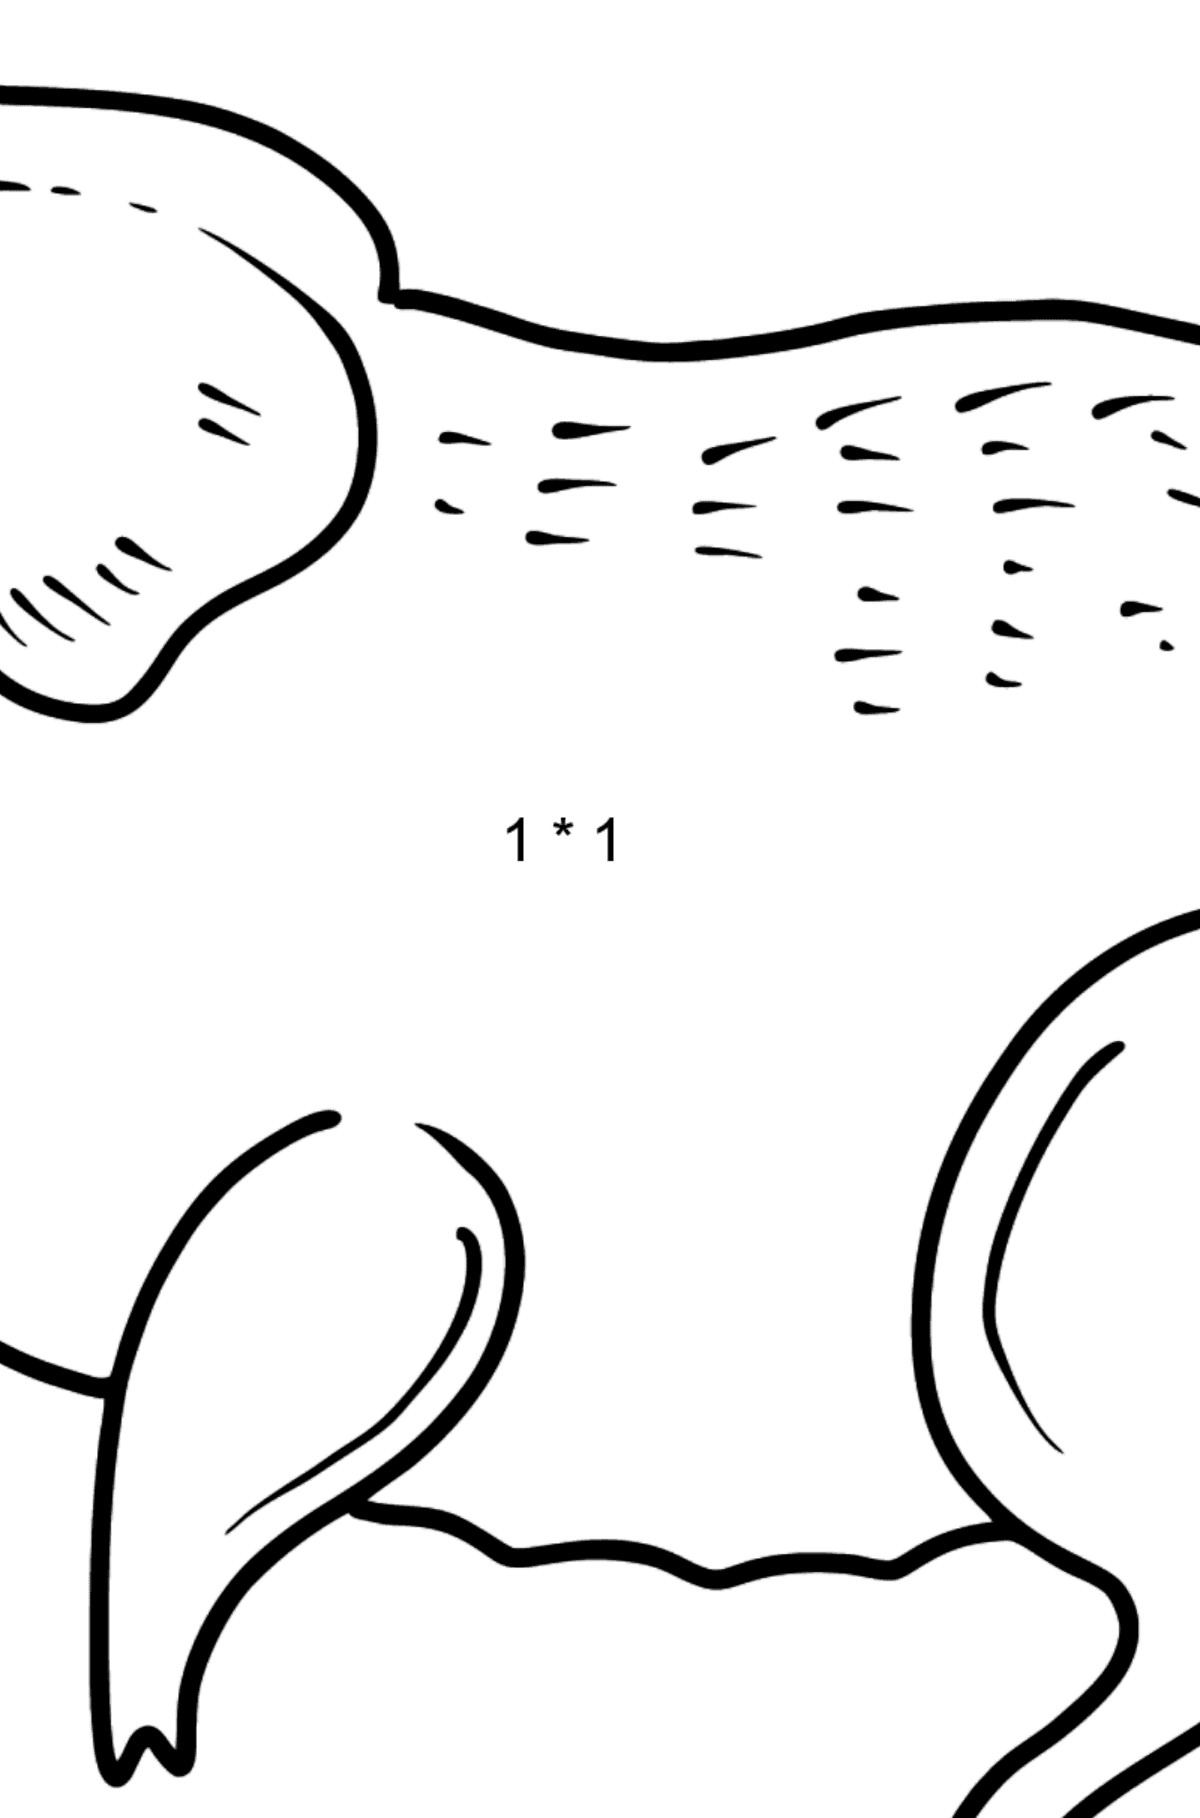 Pig coloring page - Math Coloring - Multiplication for Kids